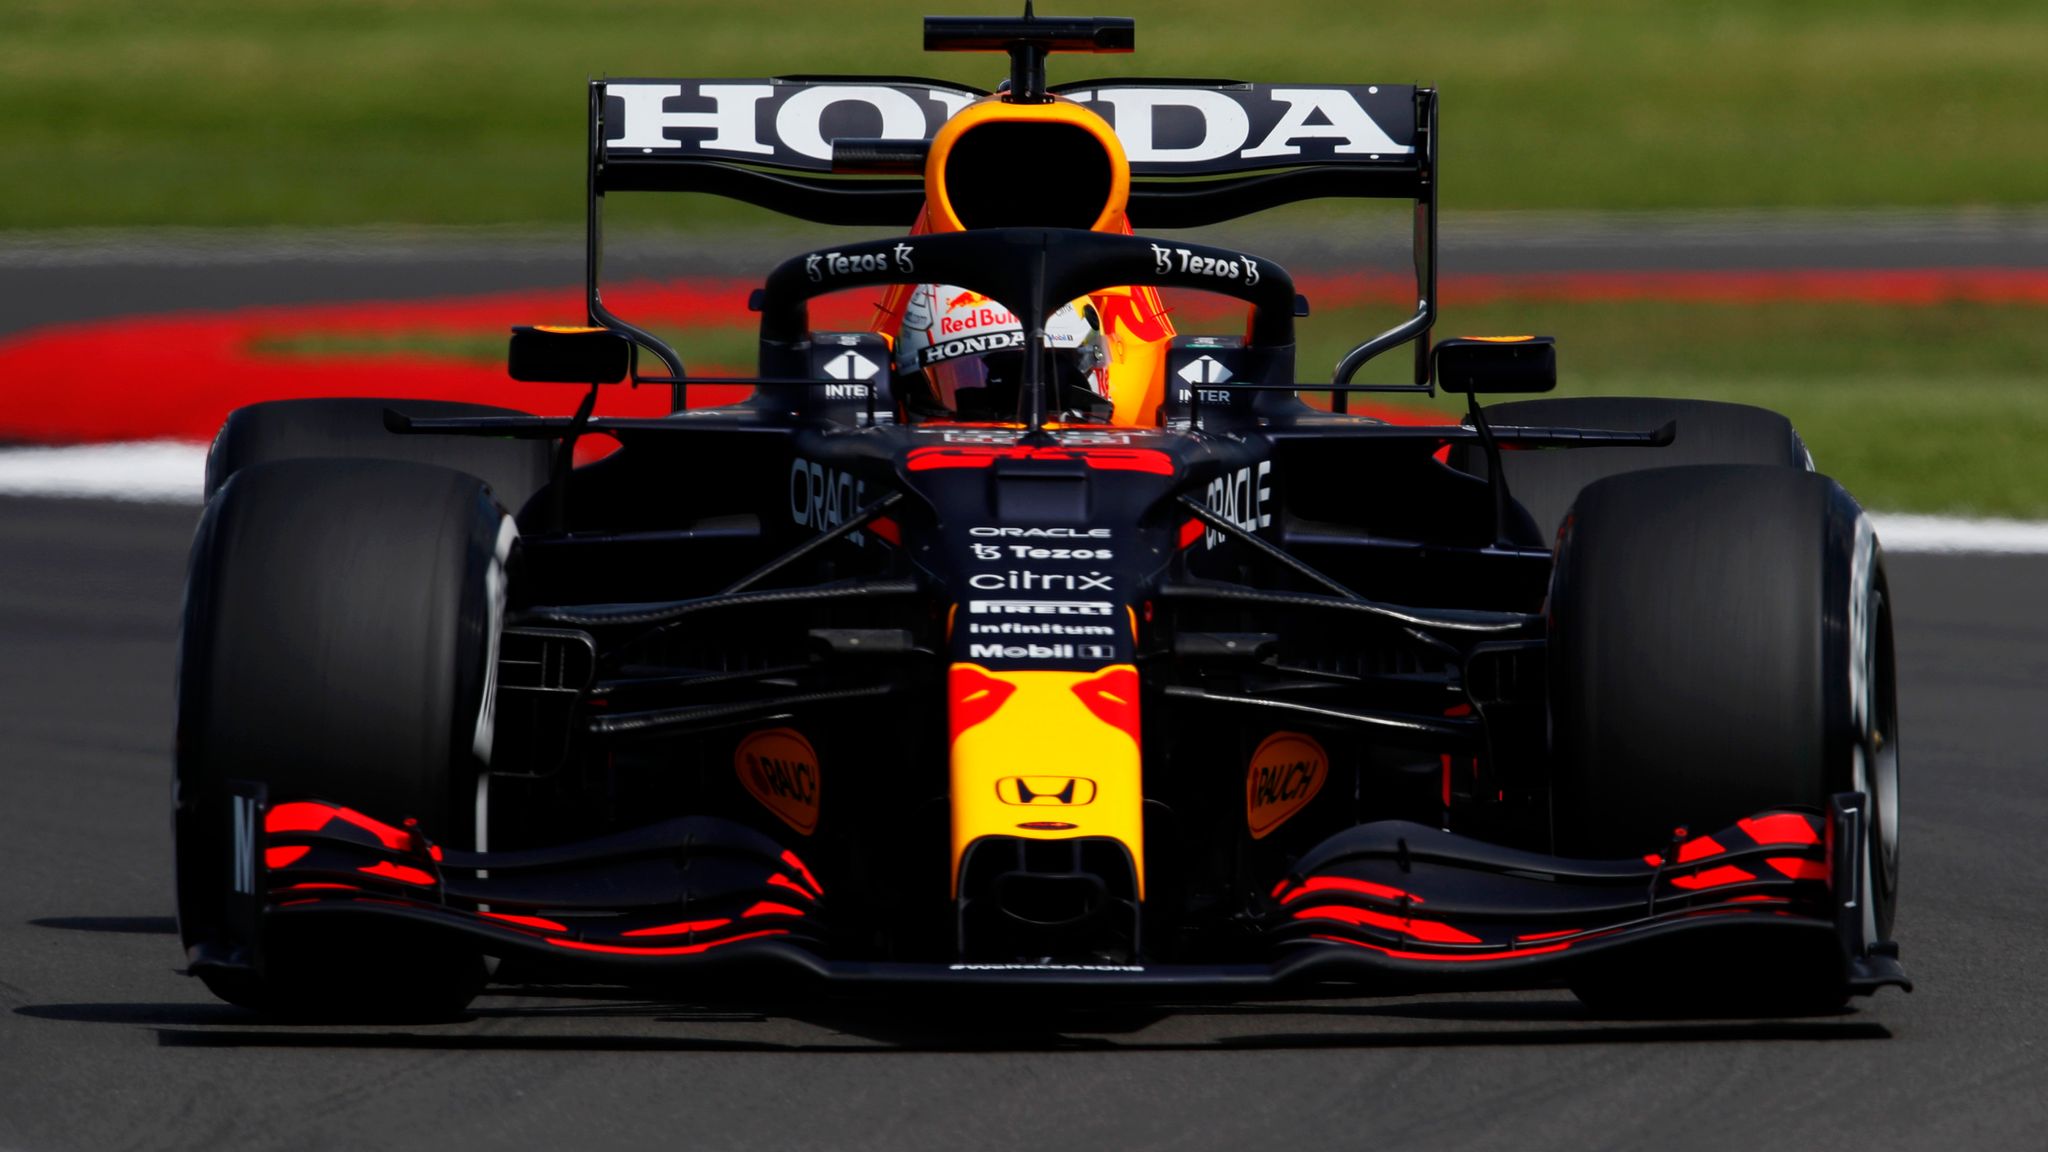 British GP Max Verstappen dominantly tops only practice session before Silverstone qualifying F1 News